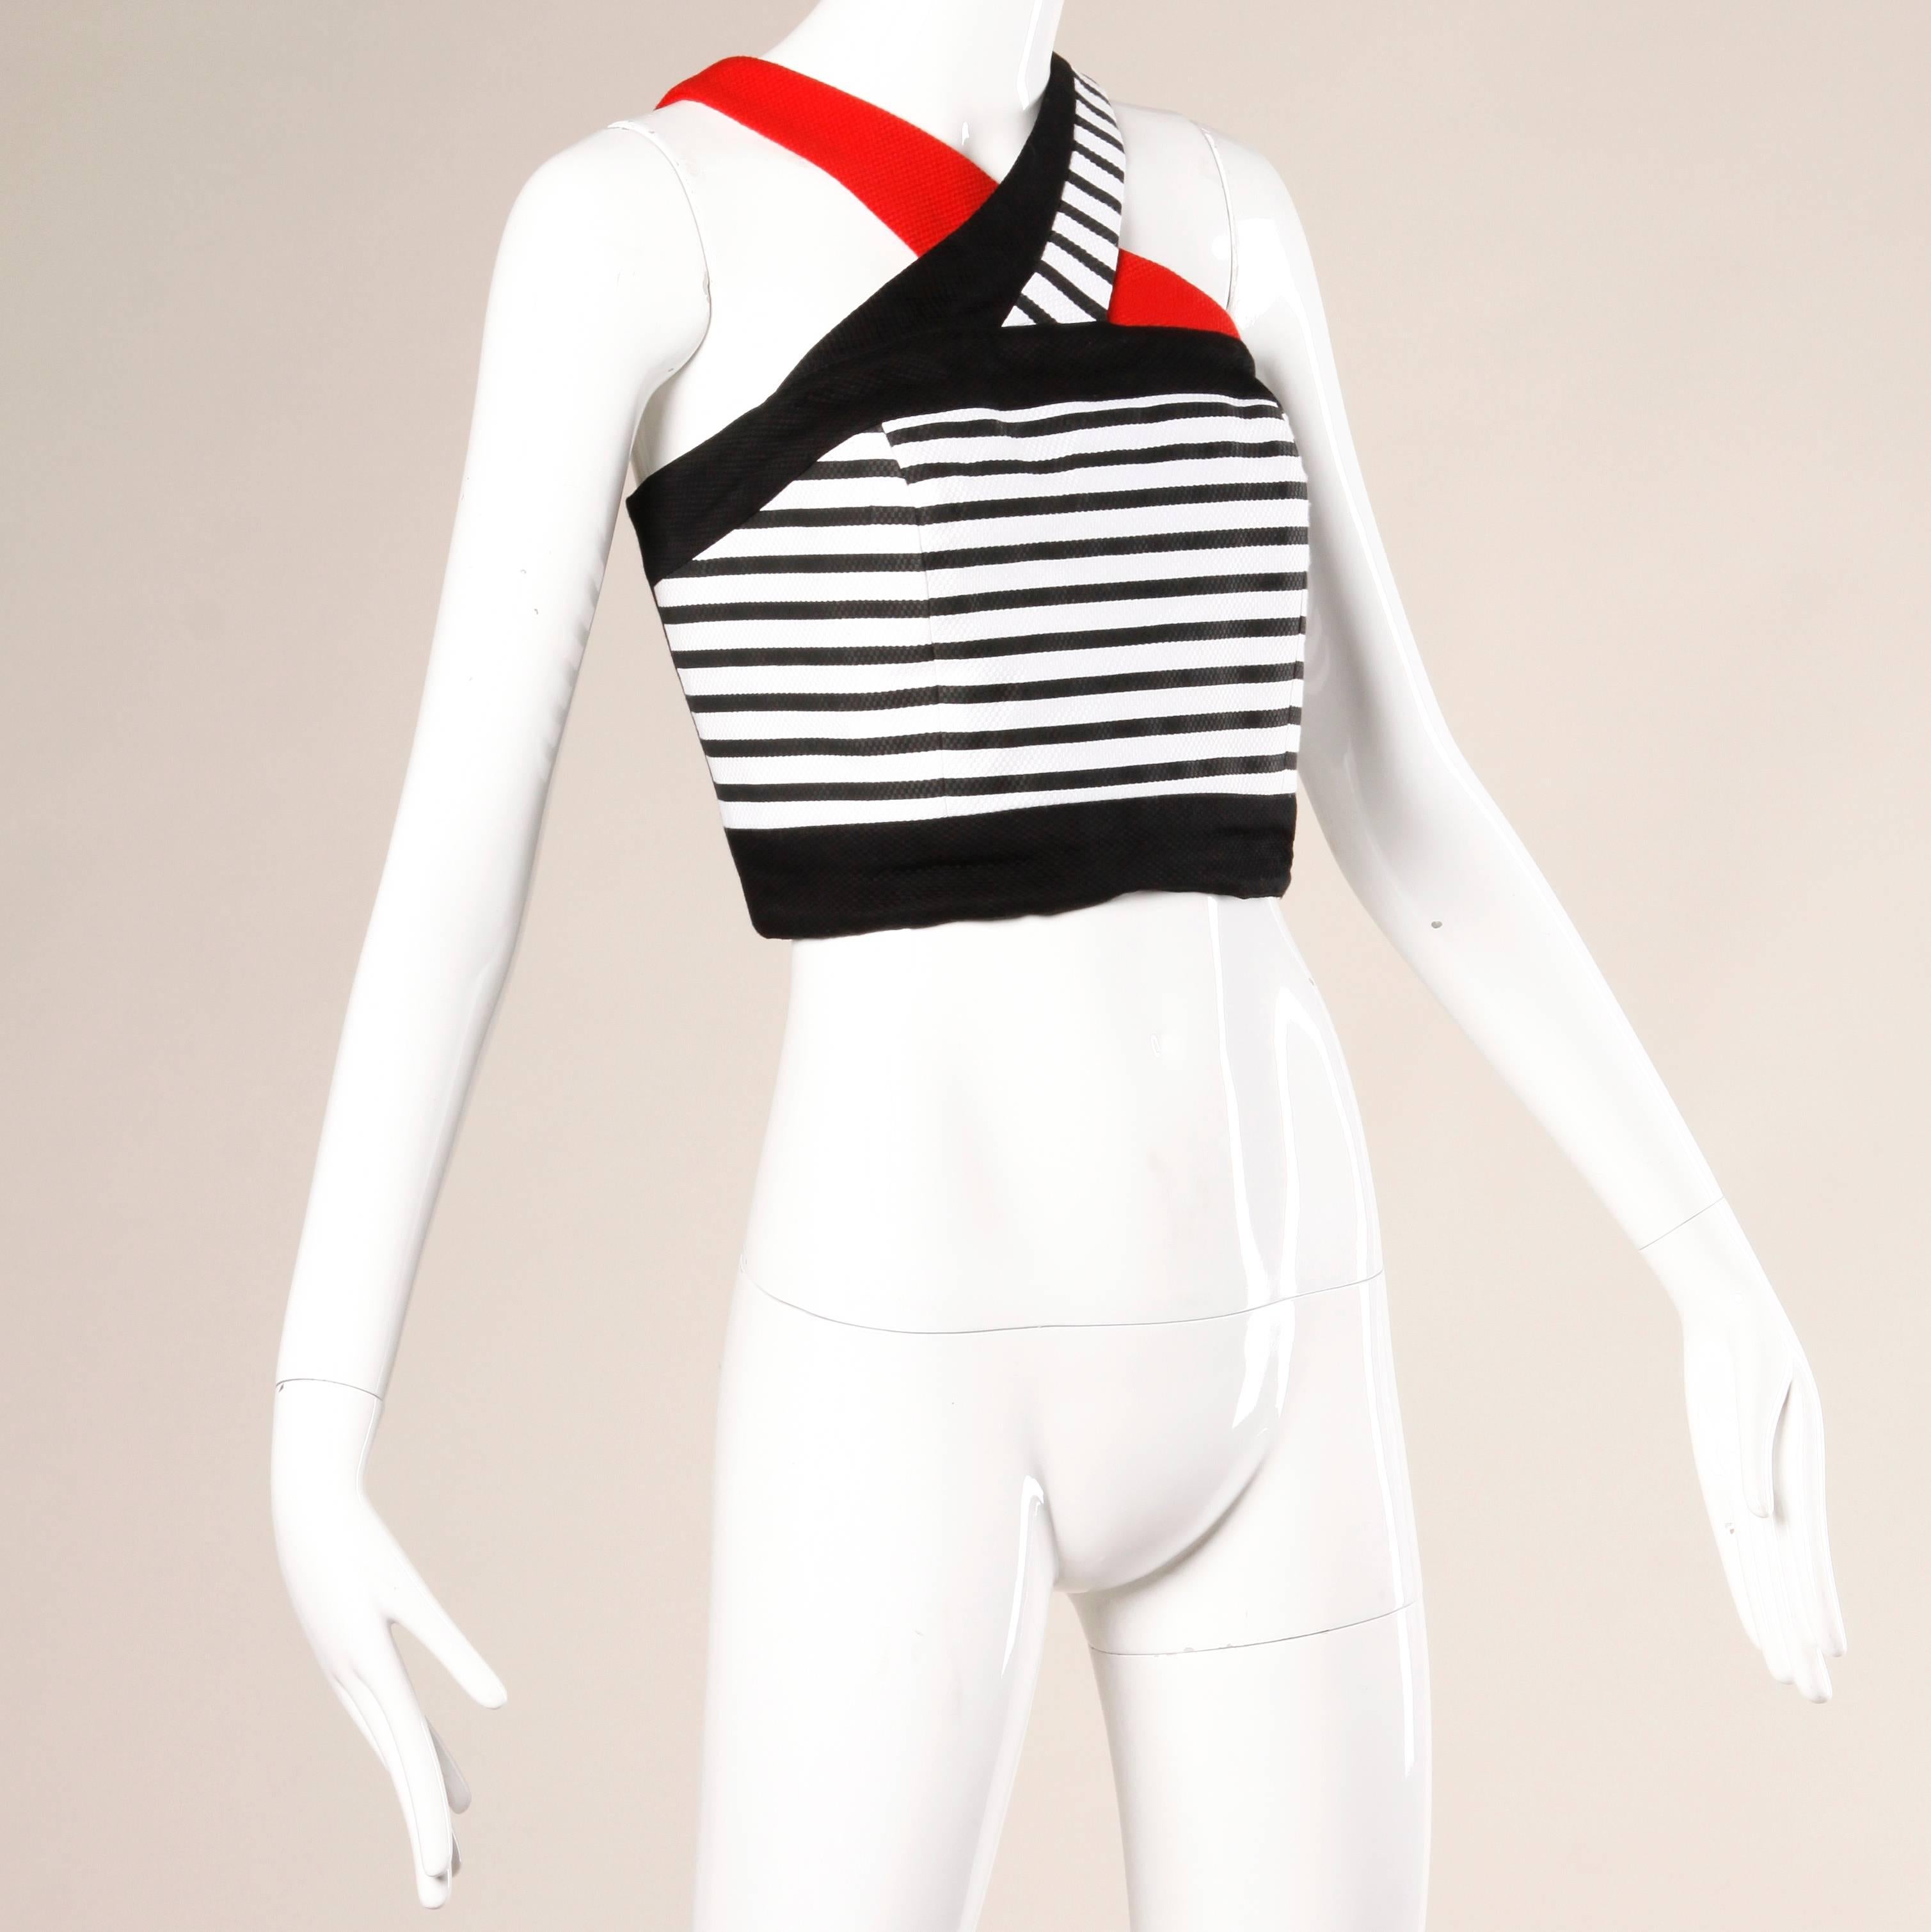 Vintage 80s/90s well constructed striped crop top in red, white and black by Lillie Rubin.

Details:

Fully Lined
Back Button Closure
Marked Size: US 10
Estimated Size: 10
Color: Black/ White/ Red
Fabric: Not Marked/ Feels like